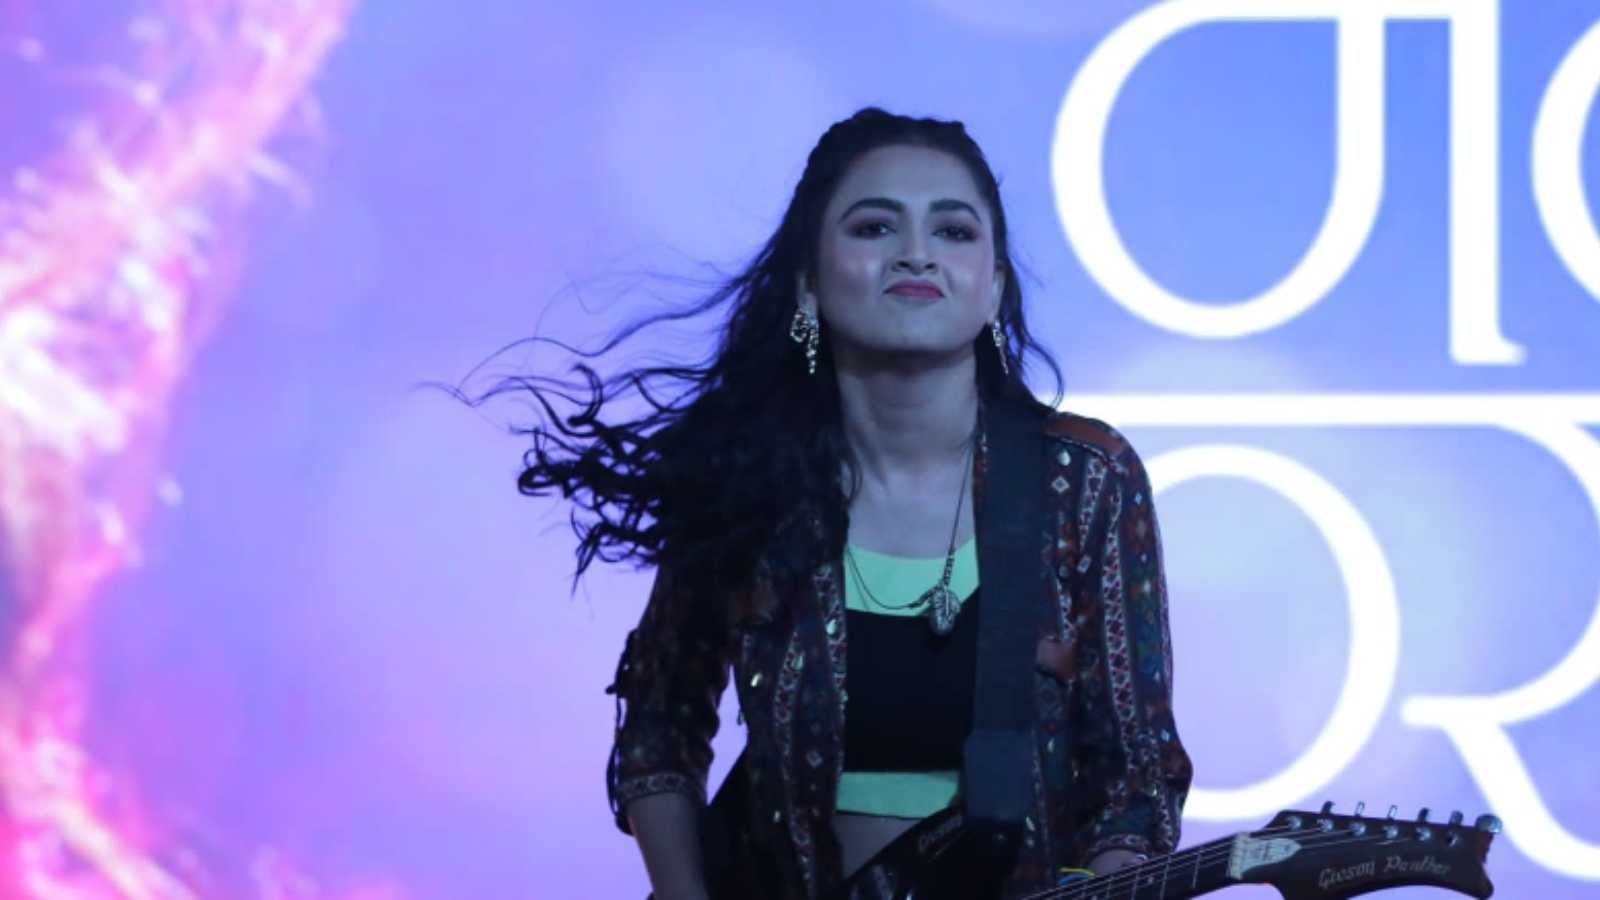 Tejasswi Prakash is a bonafide superstar as she performs at the song launch of her Marathi film Mann Kasturi Re